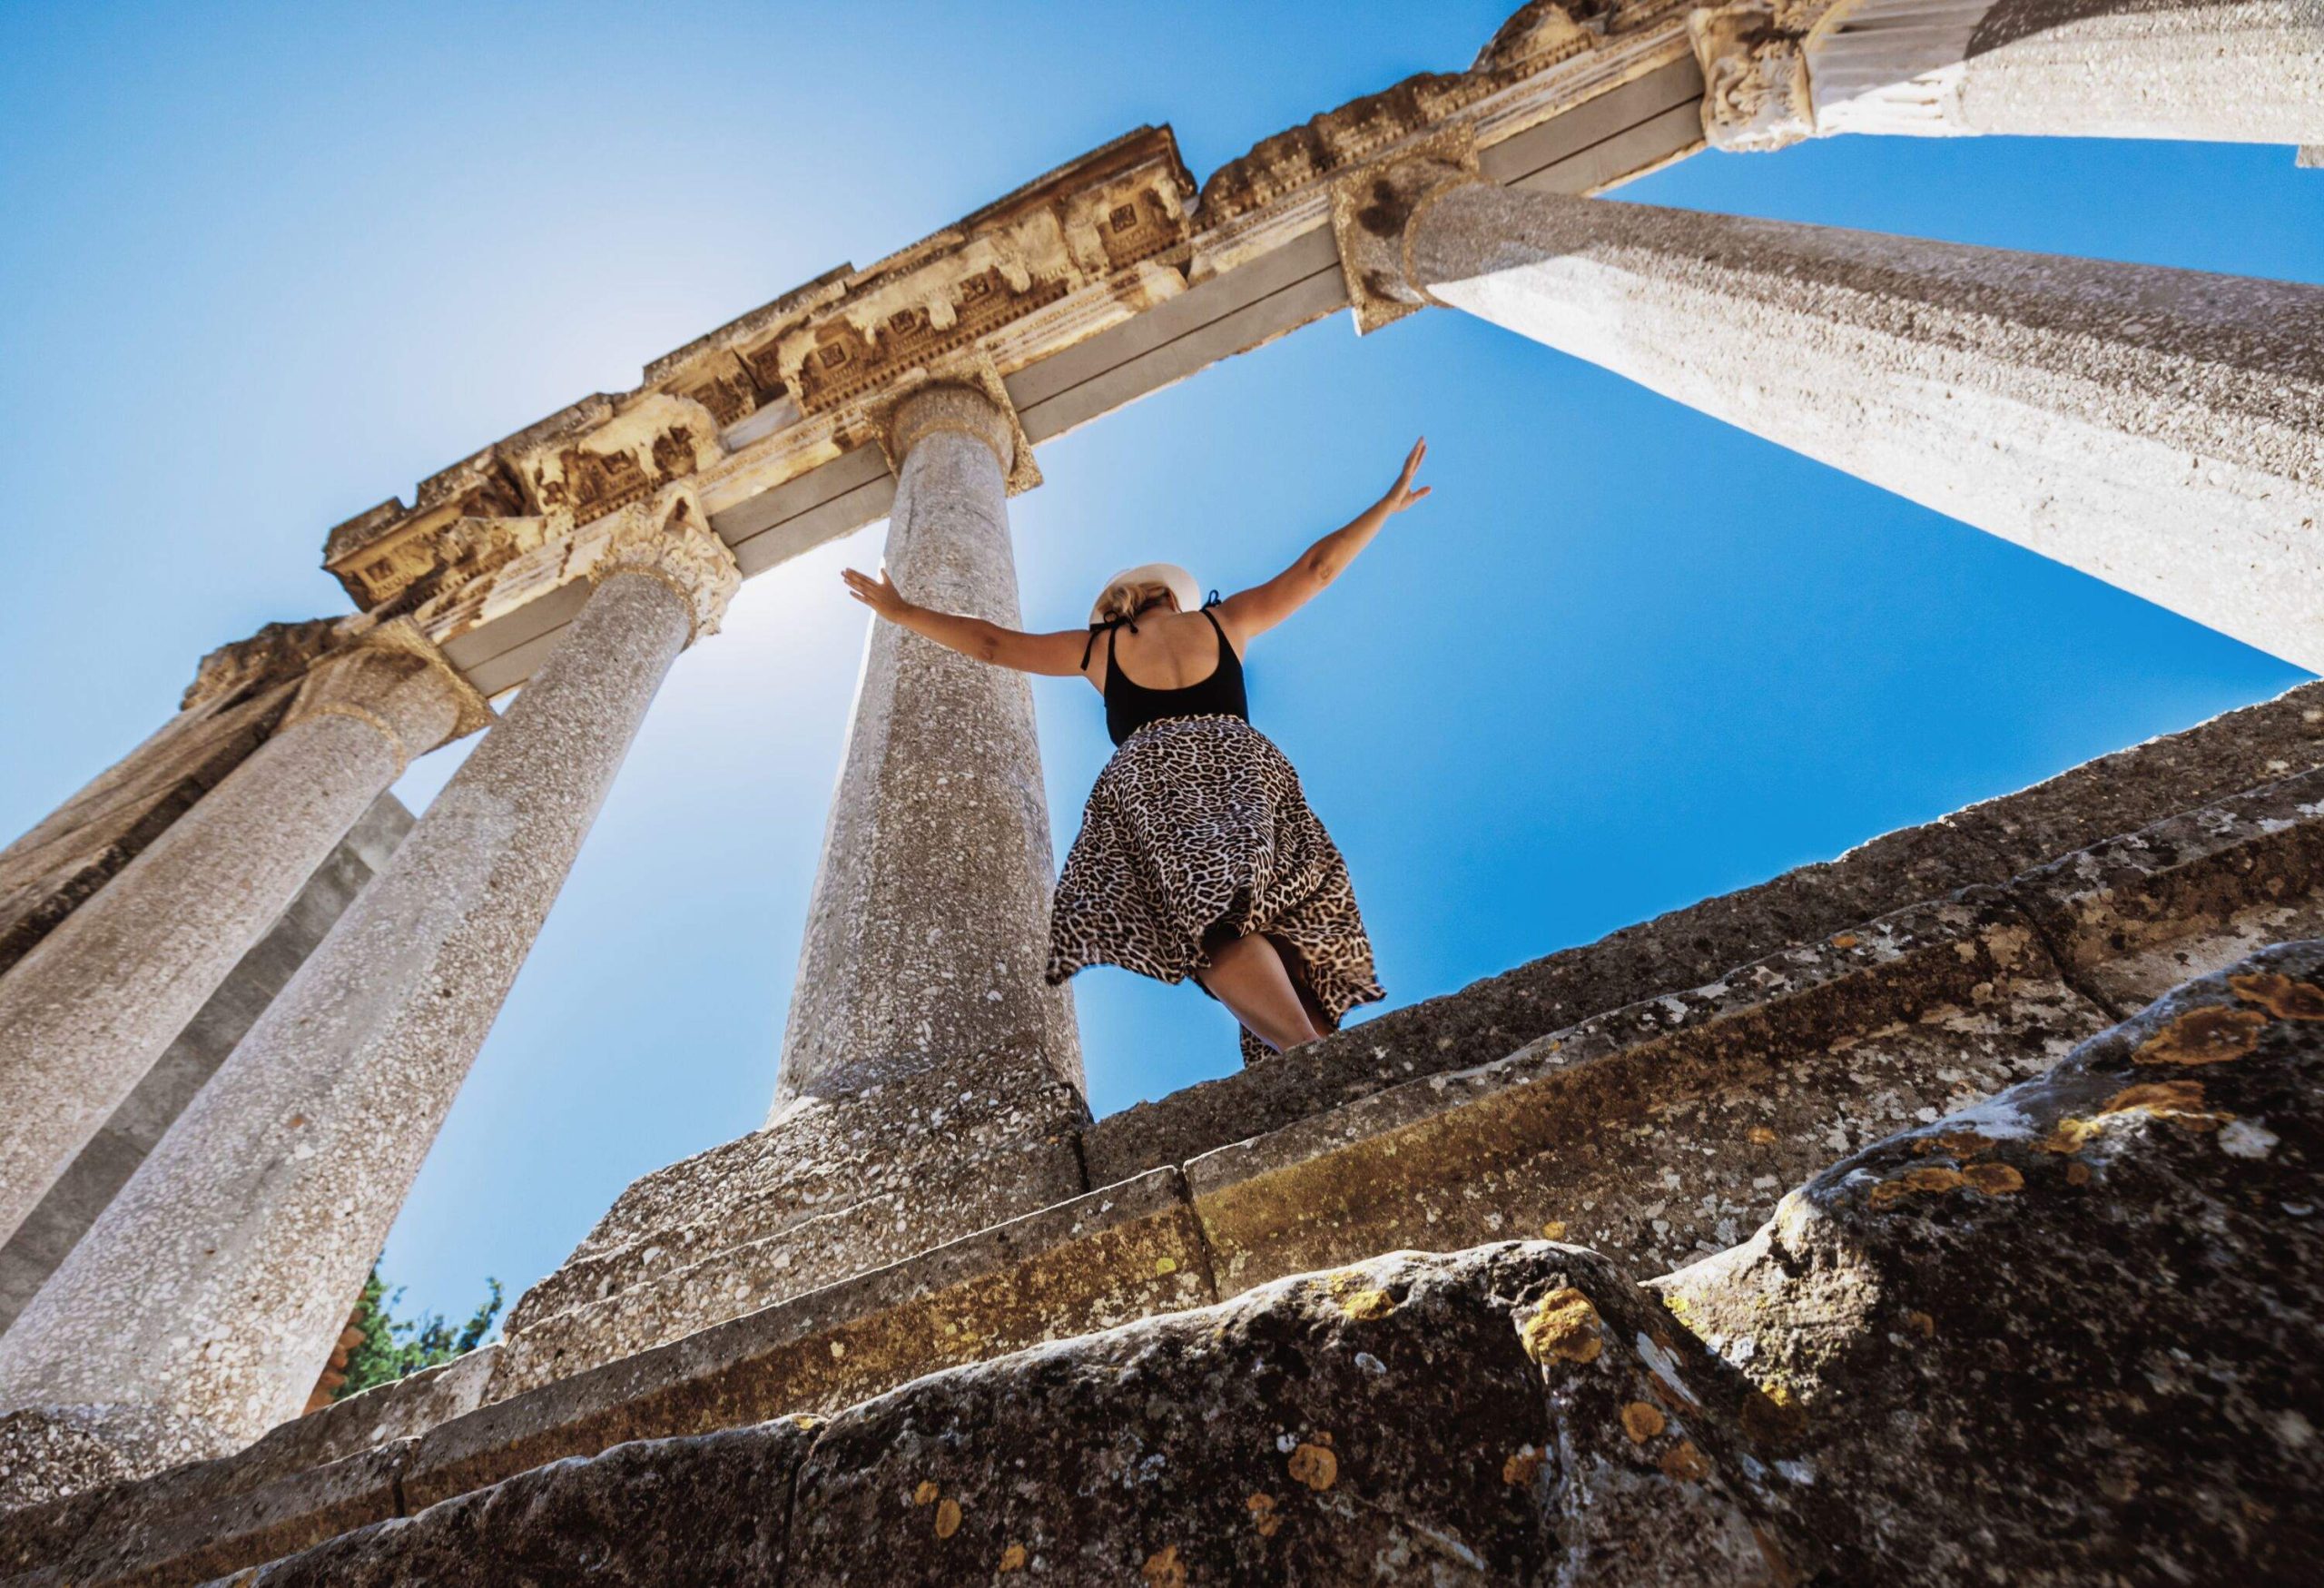 Woman enjoying with arms outstretched while exploring old historic monument against blue sky in summer